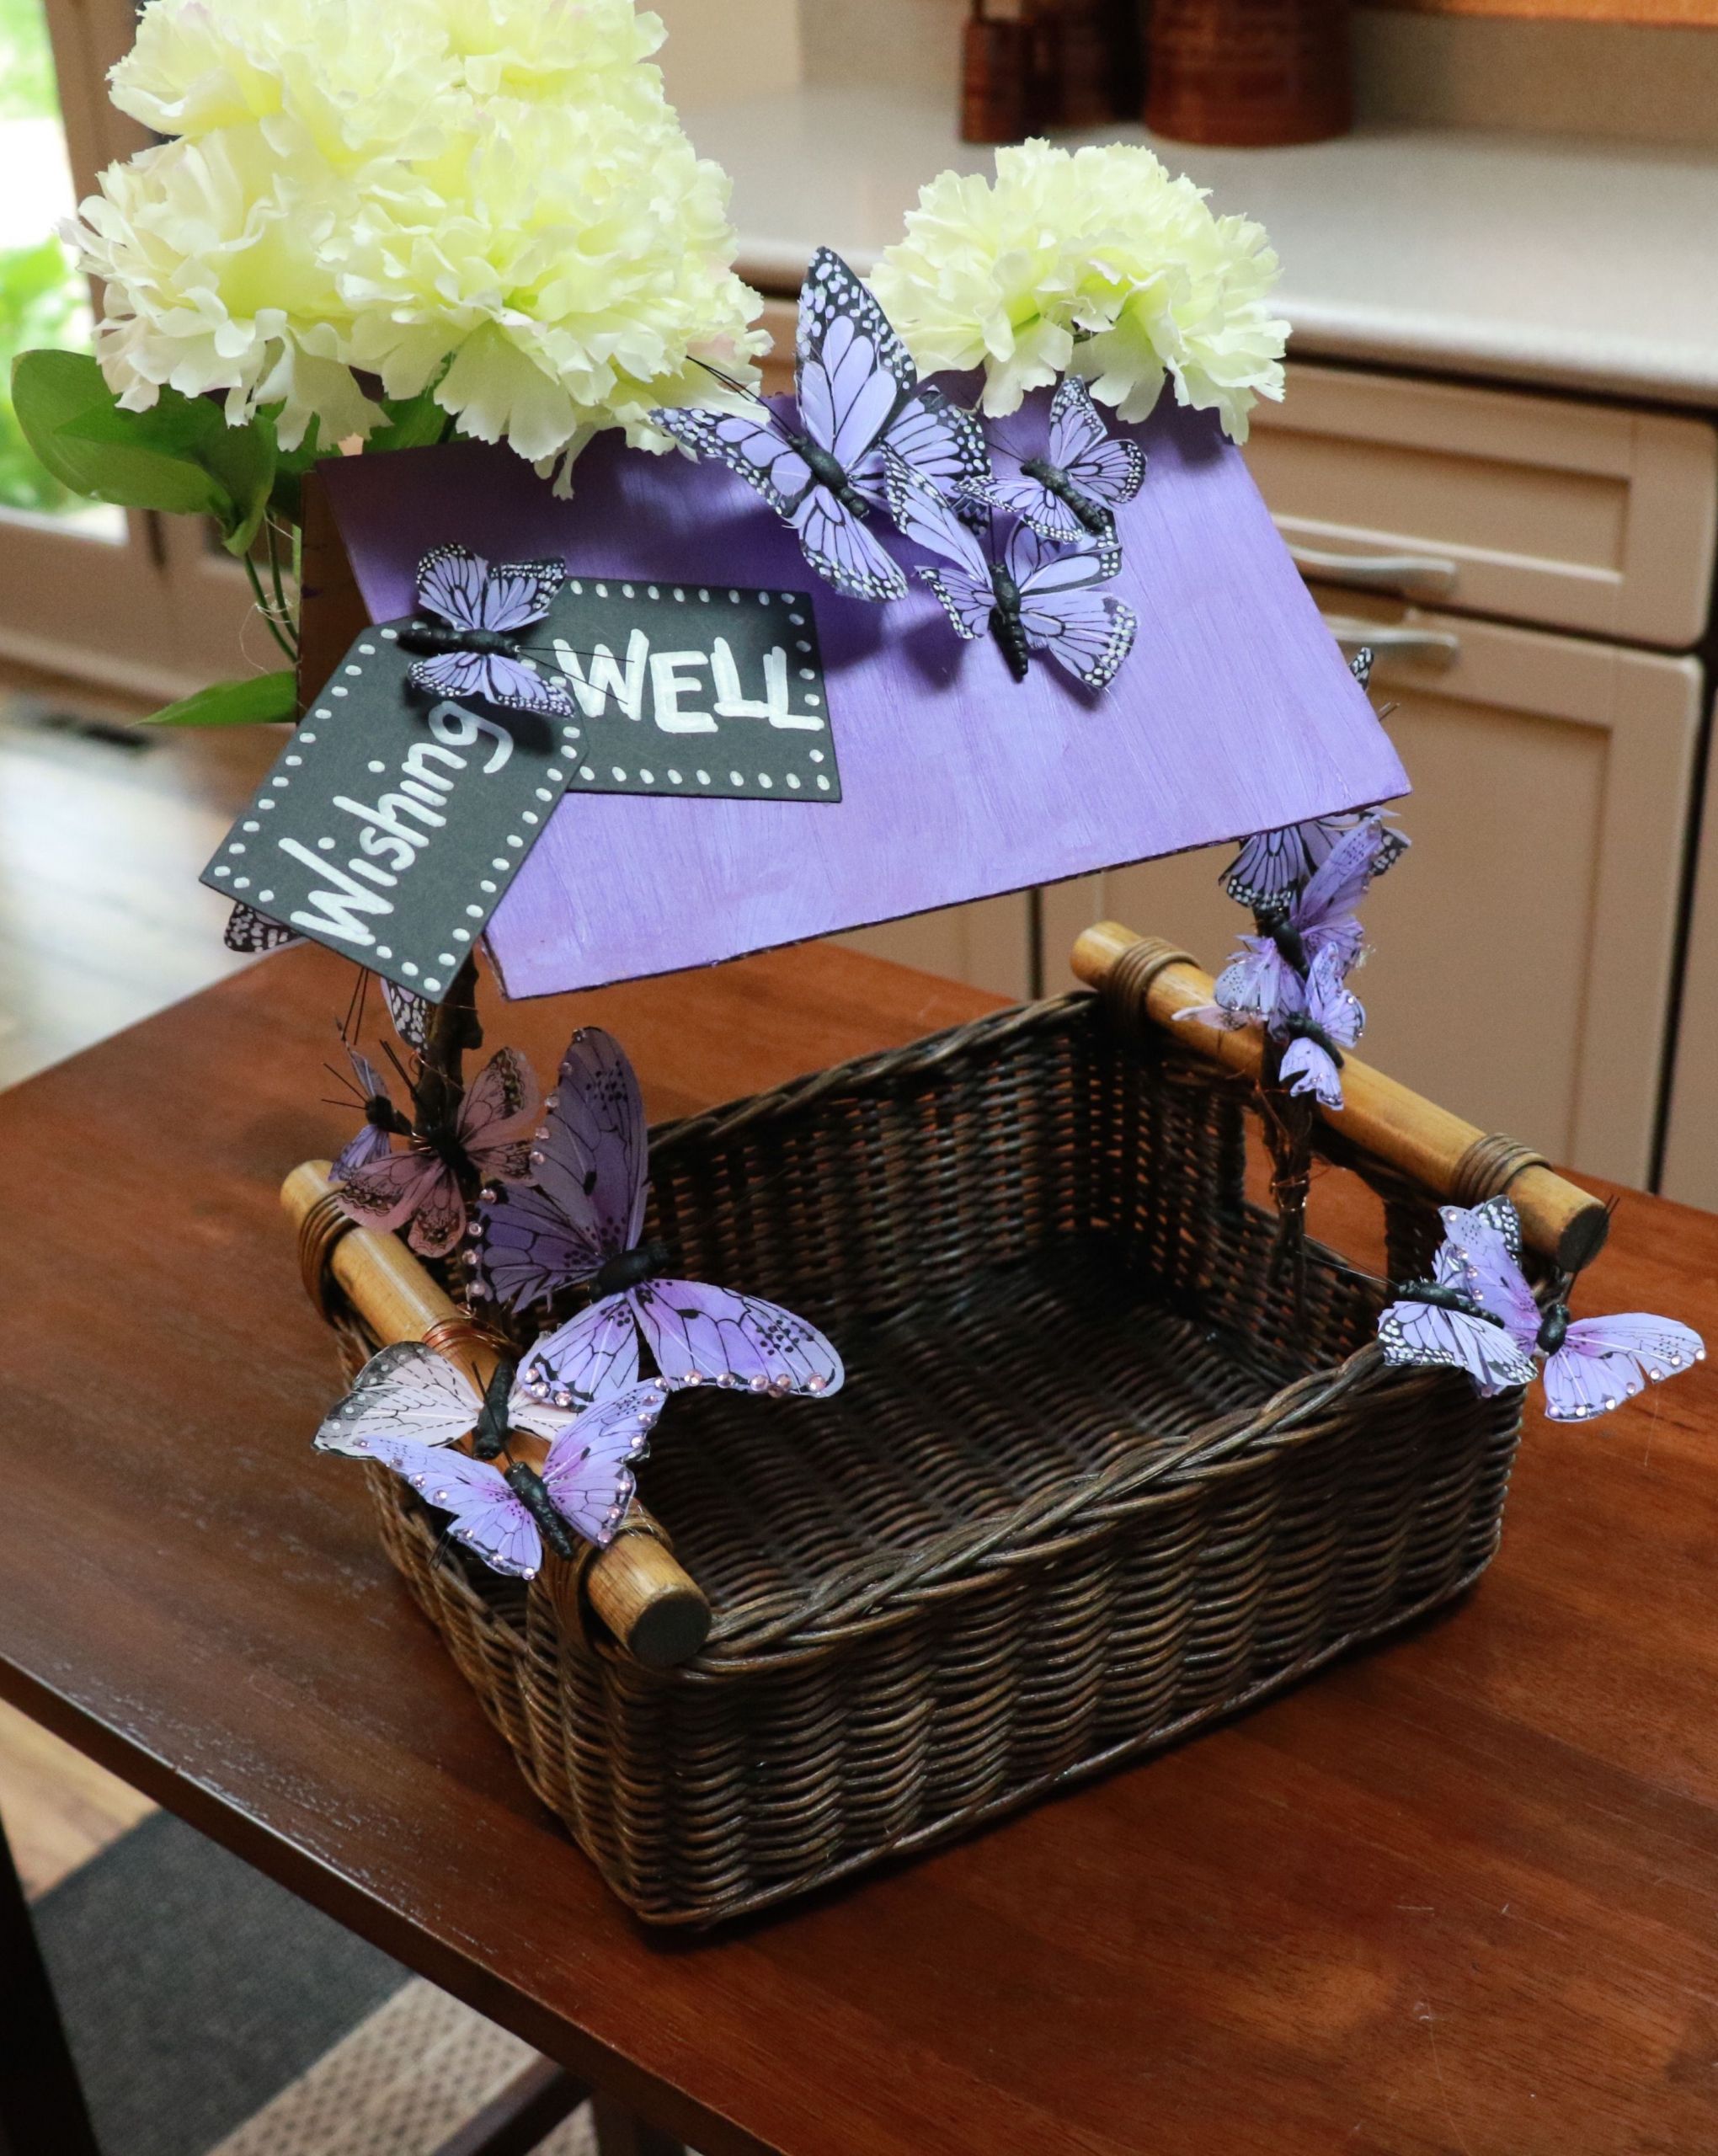 Baby Shower Wishing Well Gift Ideas
 How To Make Your Own Beautiful Wishing Well Basket For A